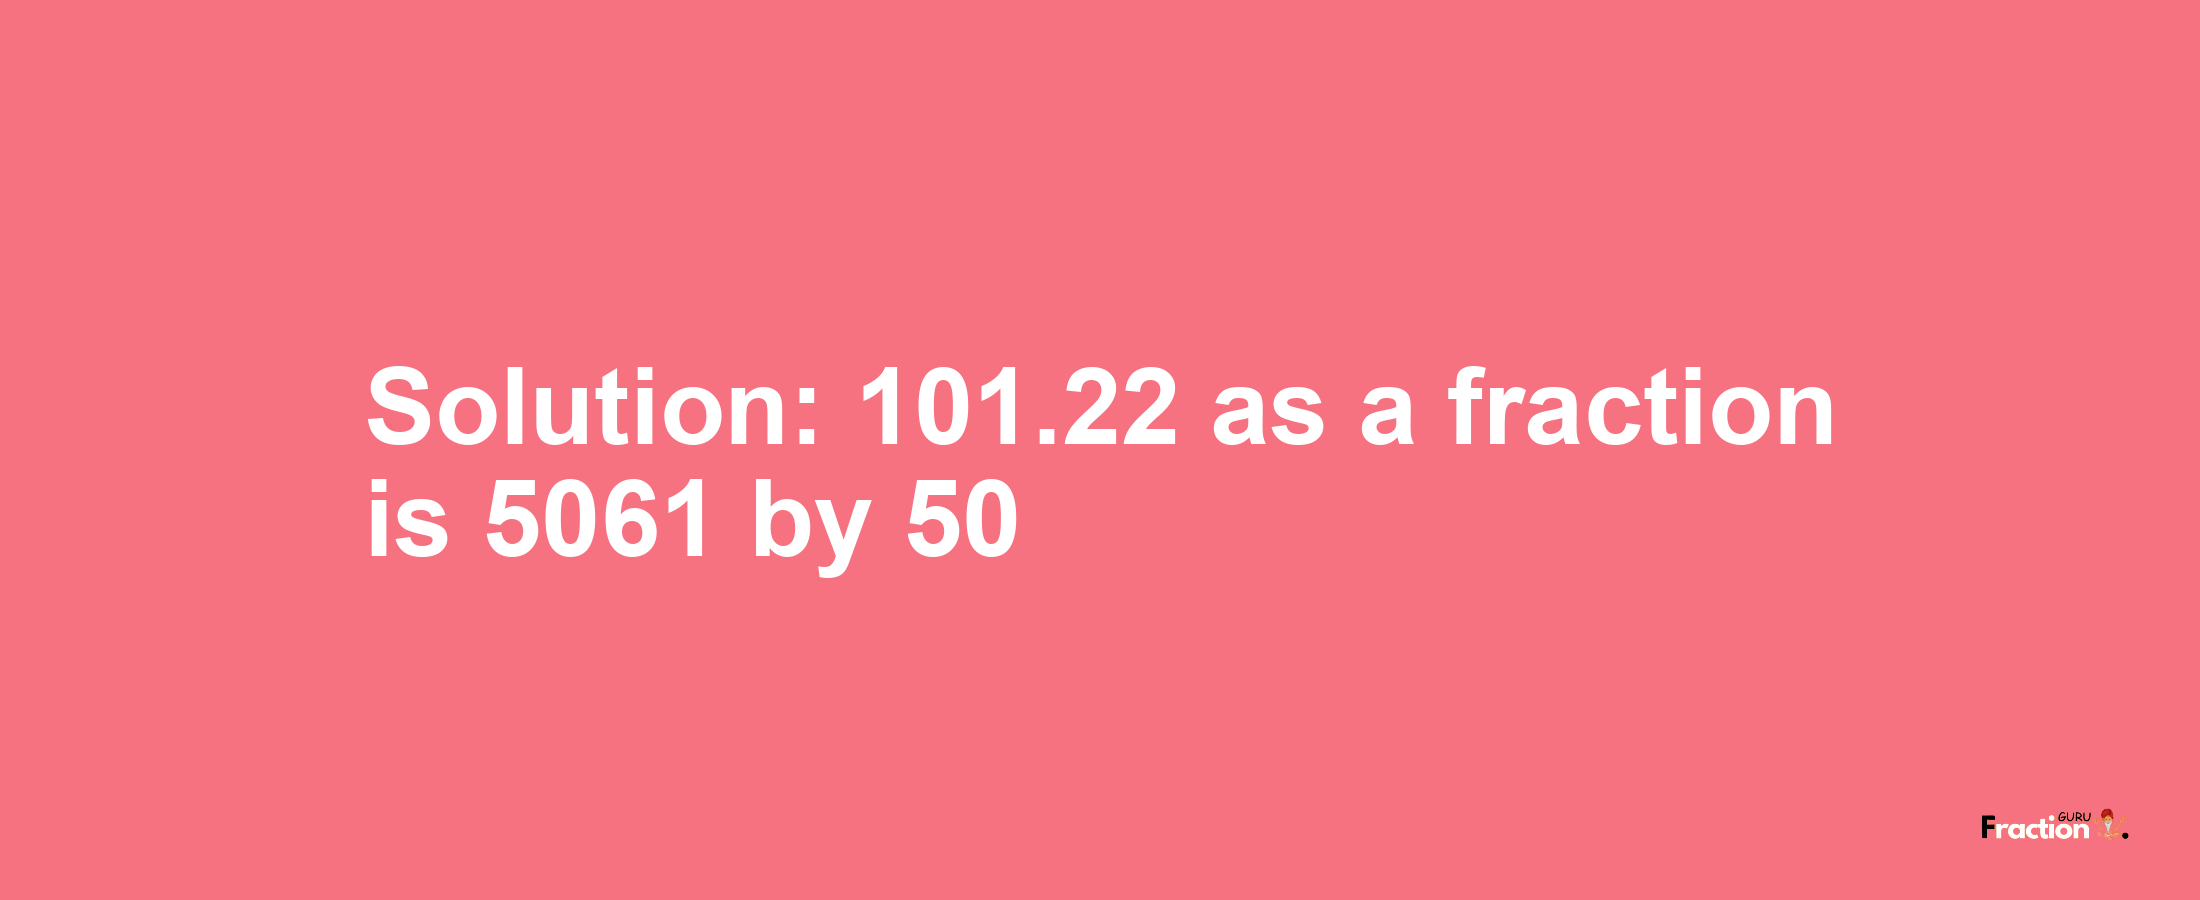 Solution:101.22 as a fraction is 5061/50